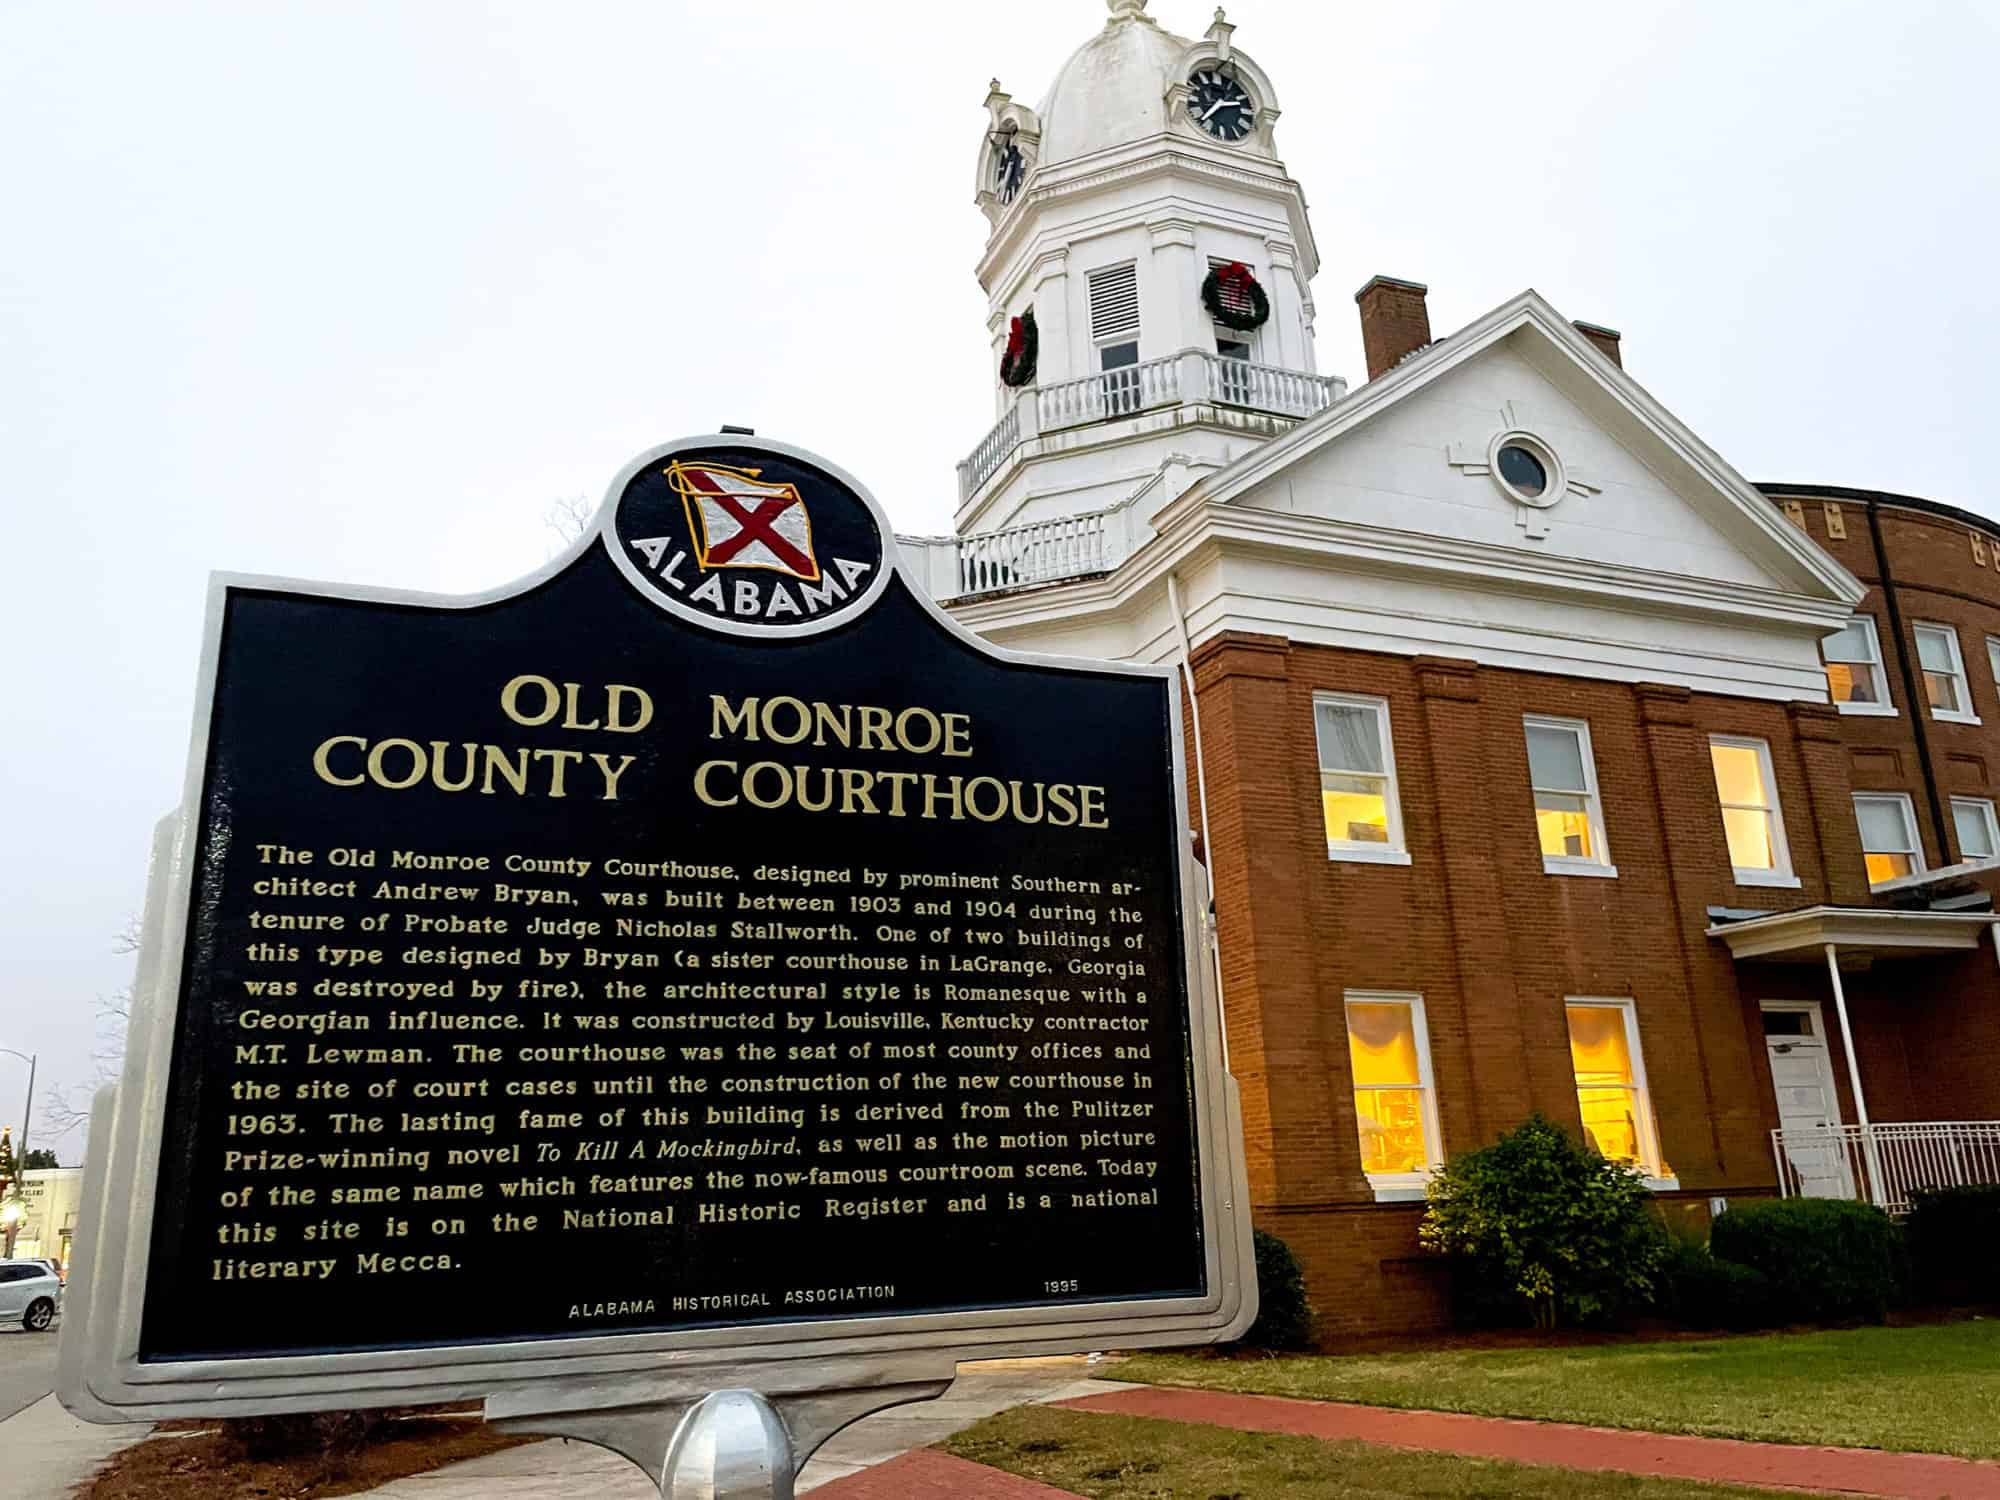 USA - Alabama - Monroeville - Old Monroe County Courthouse Sign and National Historic Register Building